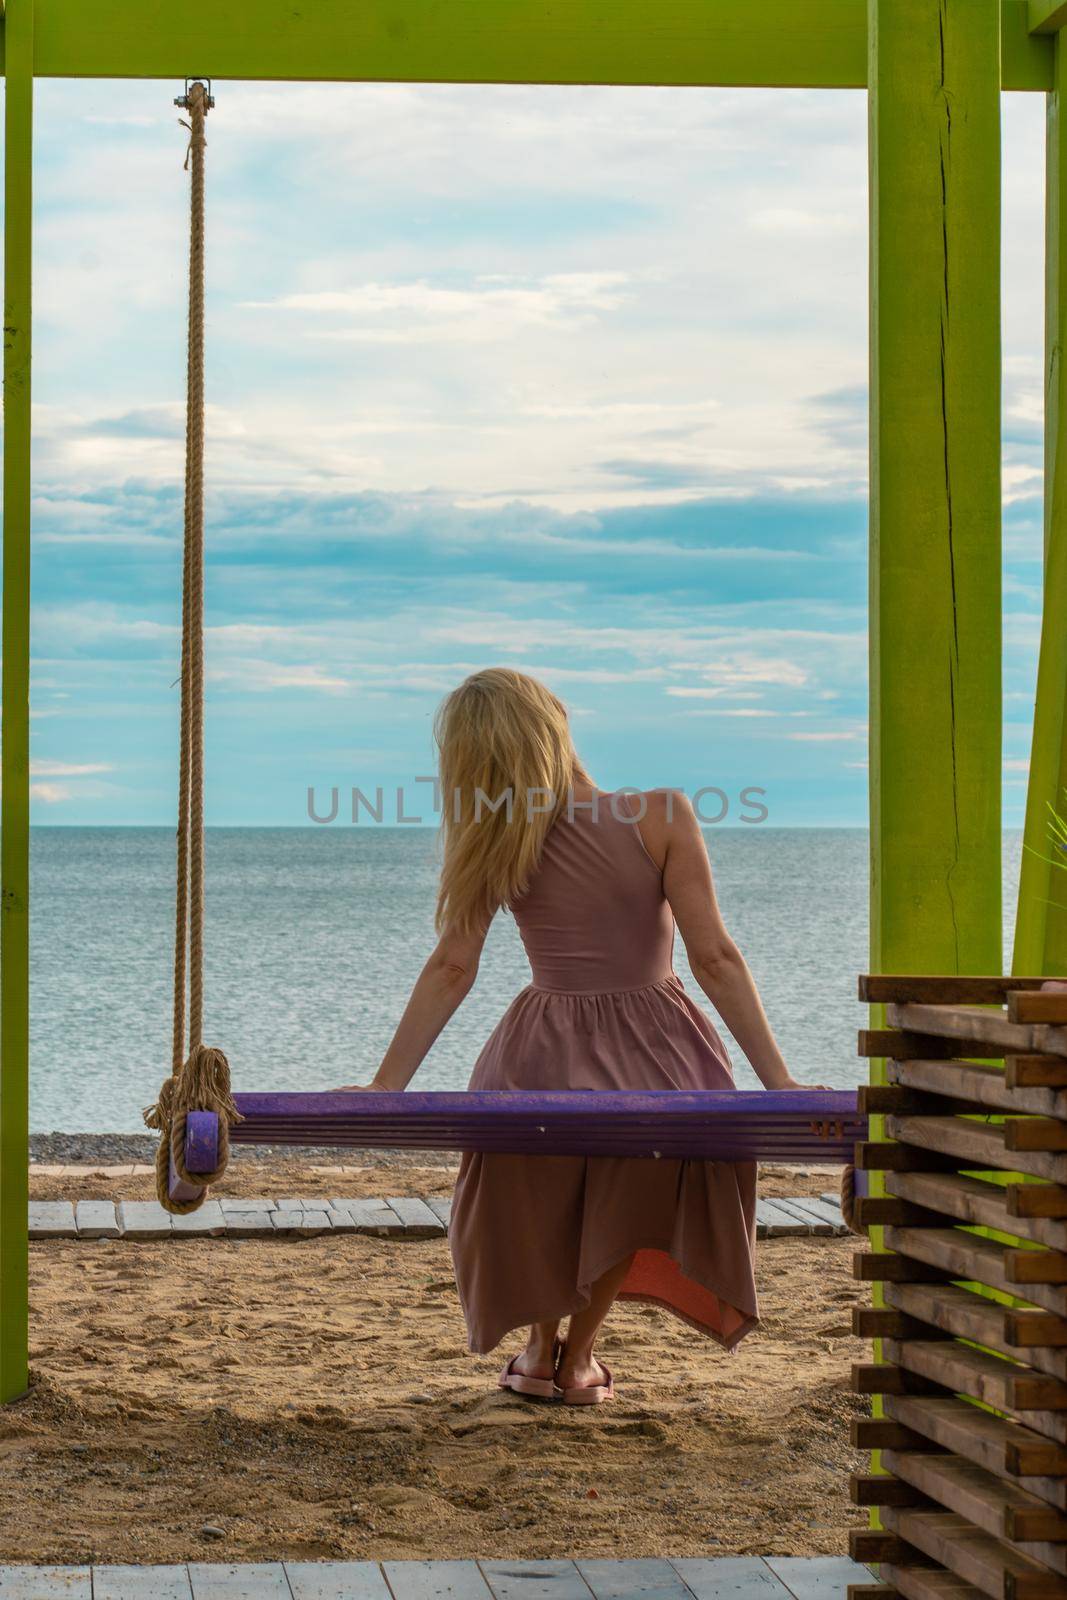 Swing happy sea summer travel beach woman leisure beautiful tourist, from dream concept for trip for girl people, blue coast. Young calm landscape, by 89167702191